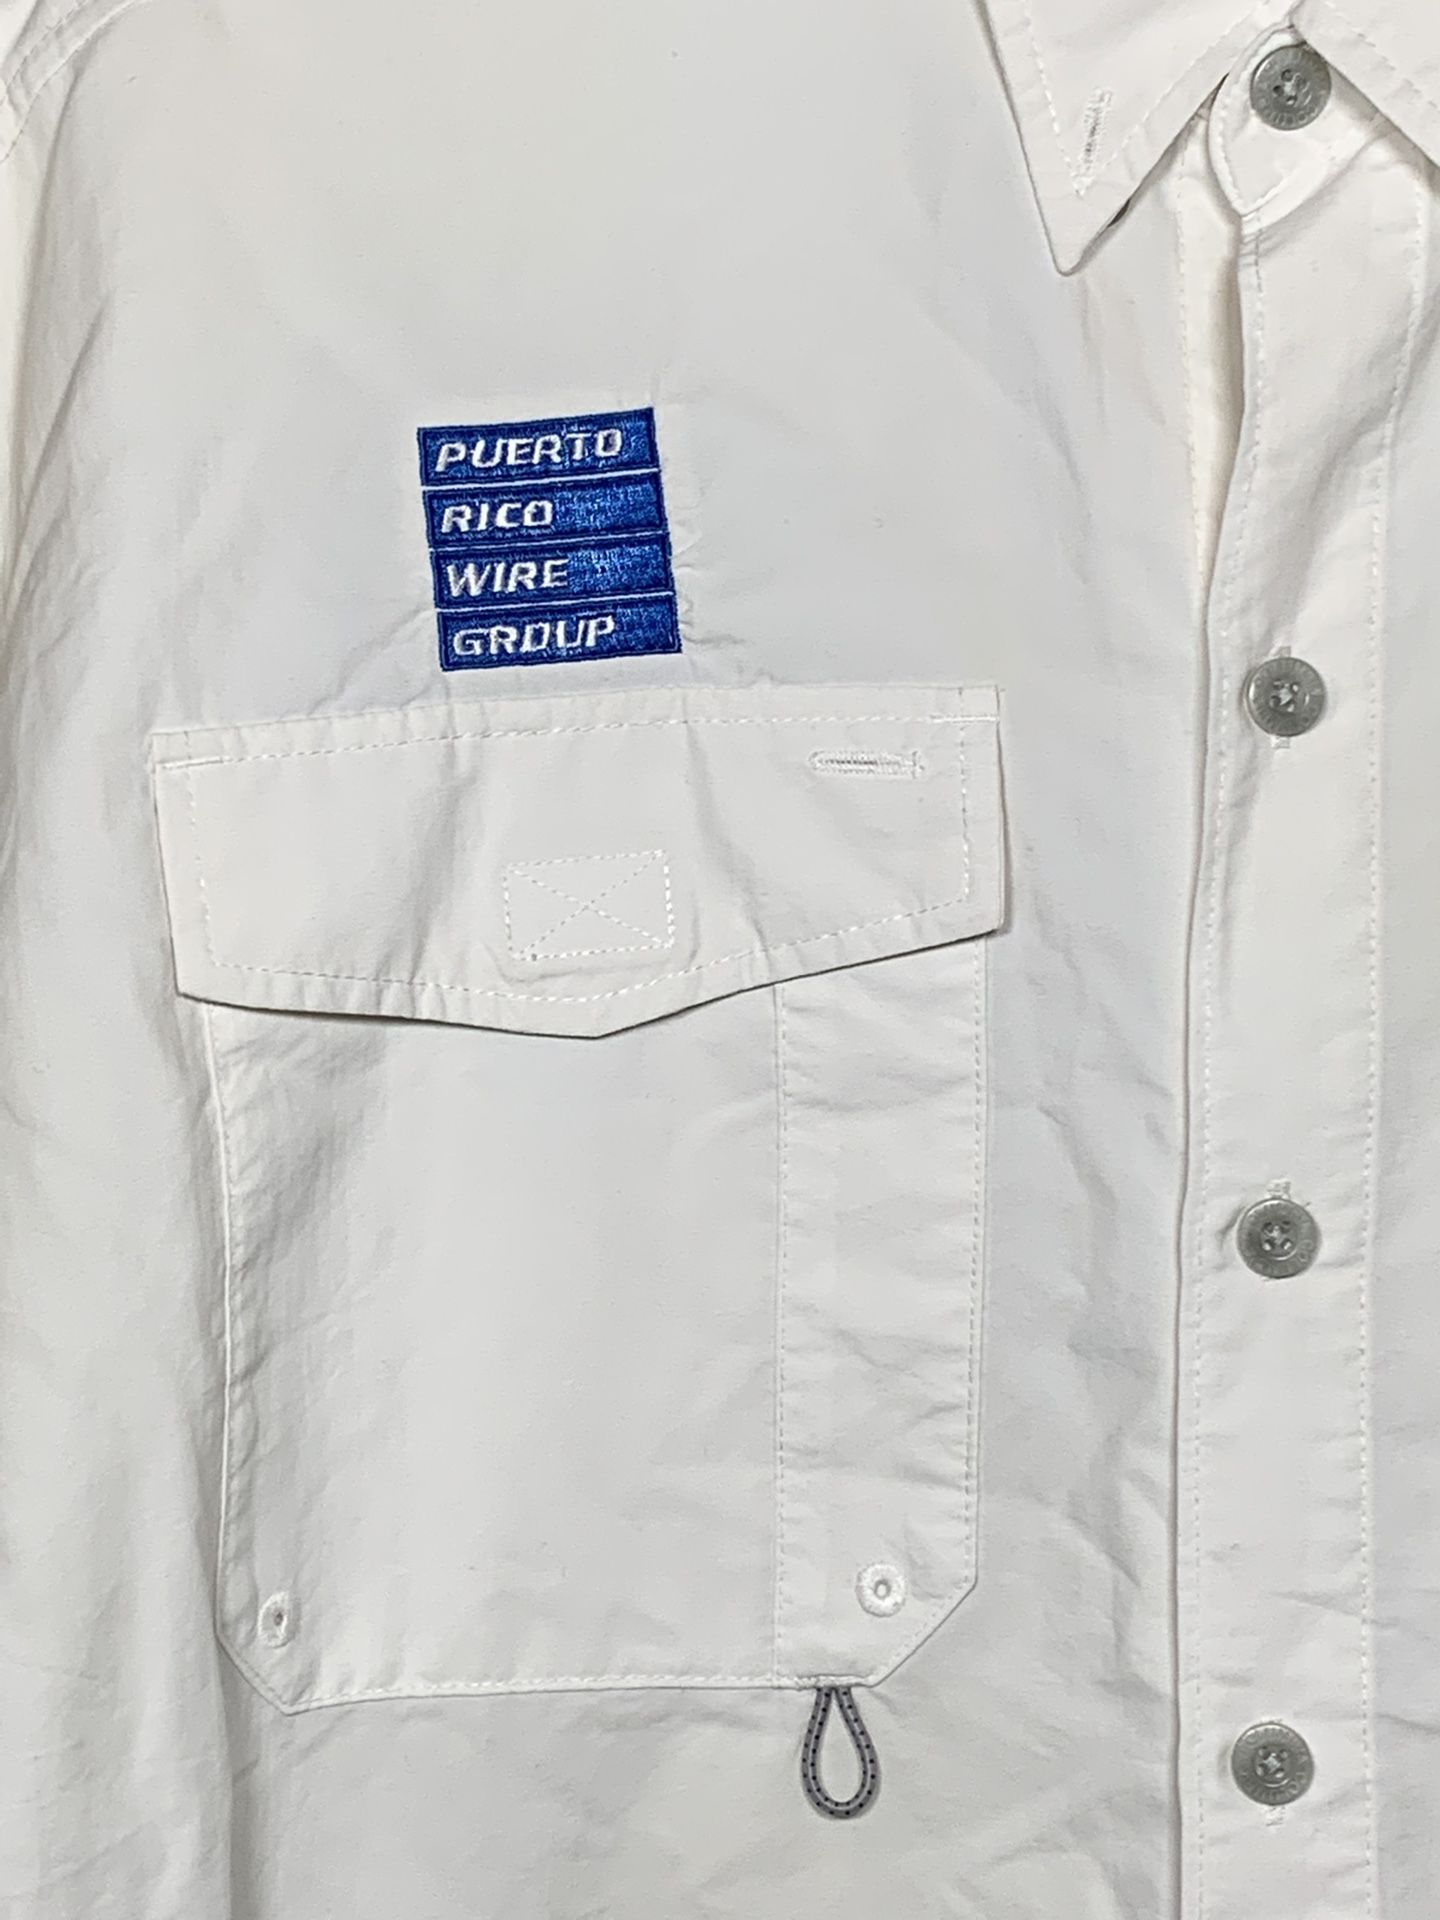 Columbia PFG Large Button Down Fishing Shirt For Men, Short Sleeve,  Ventilated for Sale in Tampa, FL - OfferUp